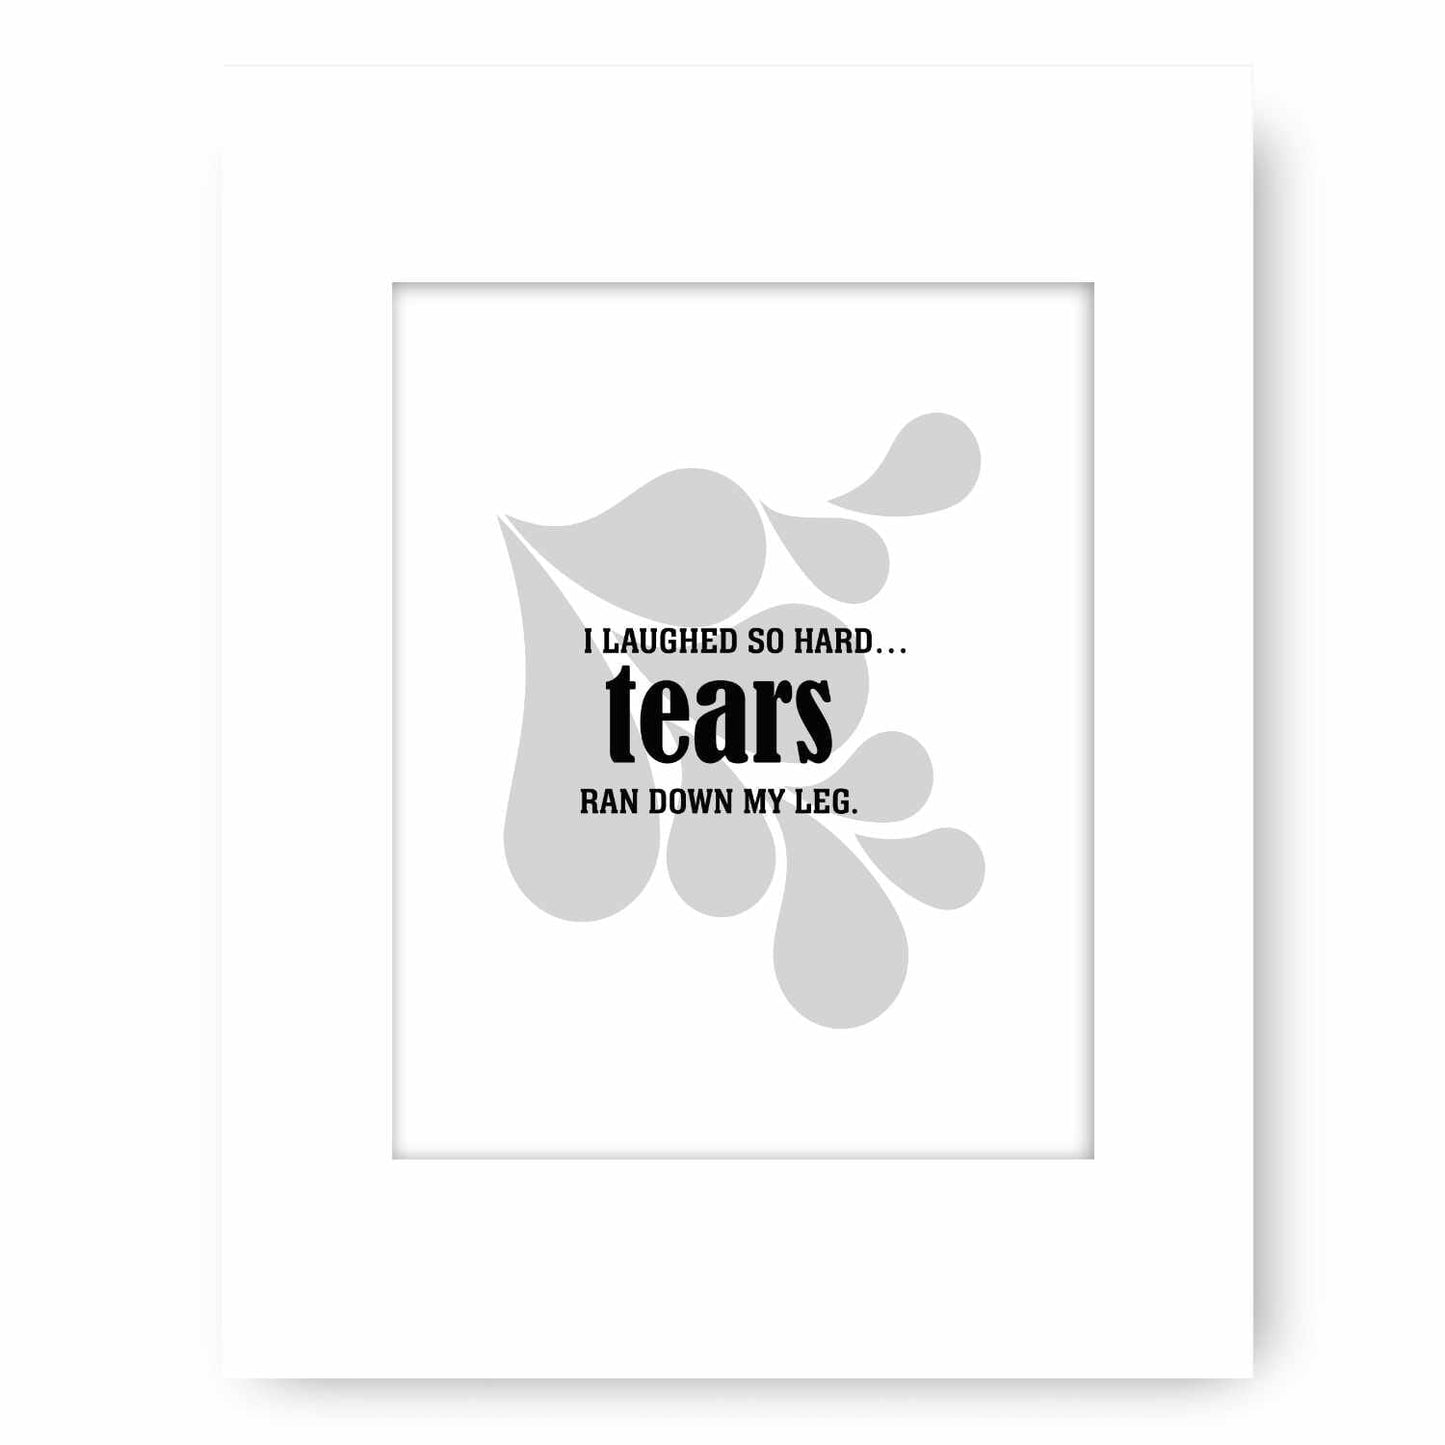 Wise and Witty Art - I Laughed So Hard Tears Ran Down My Leg Wise and Wiseass Quotes Song Lyrics Art 8x10 White Matted Print 